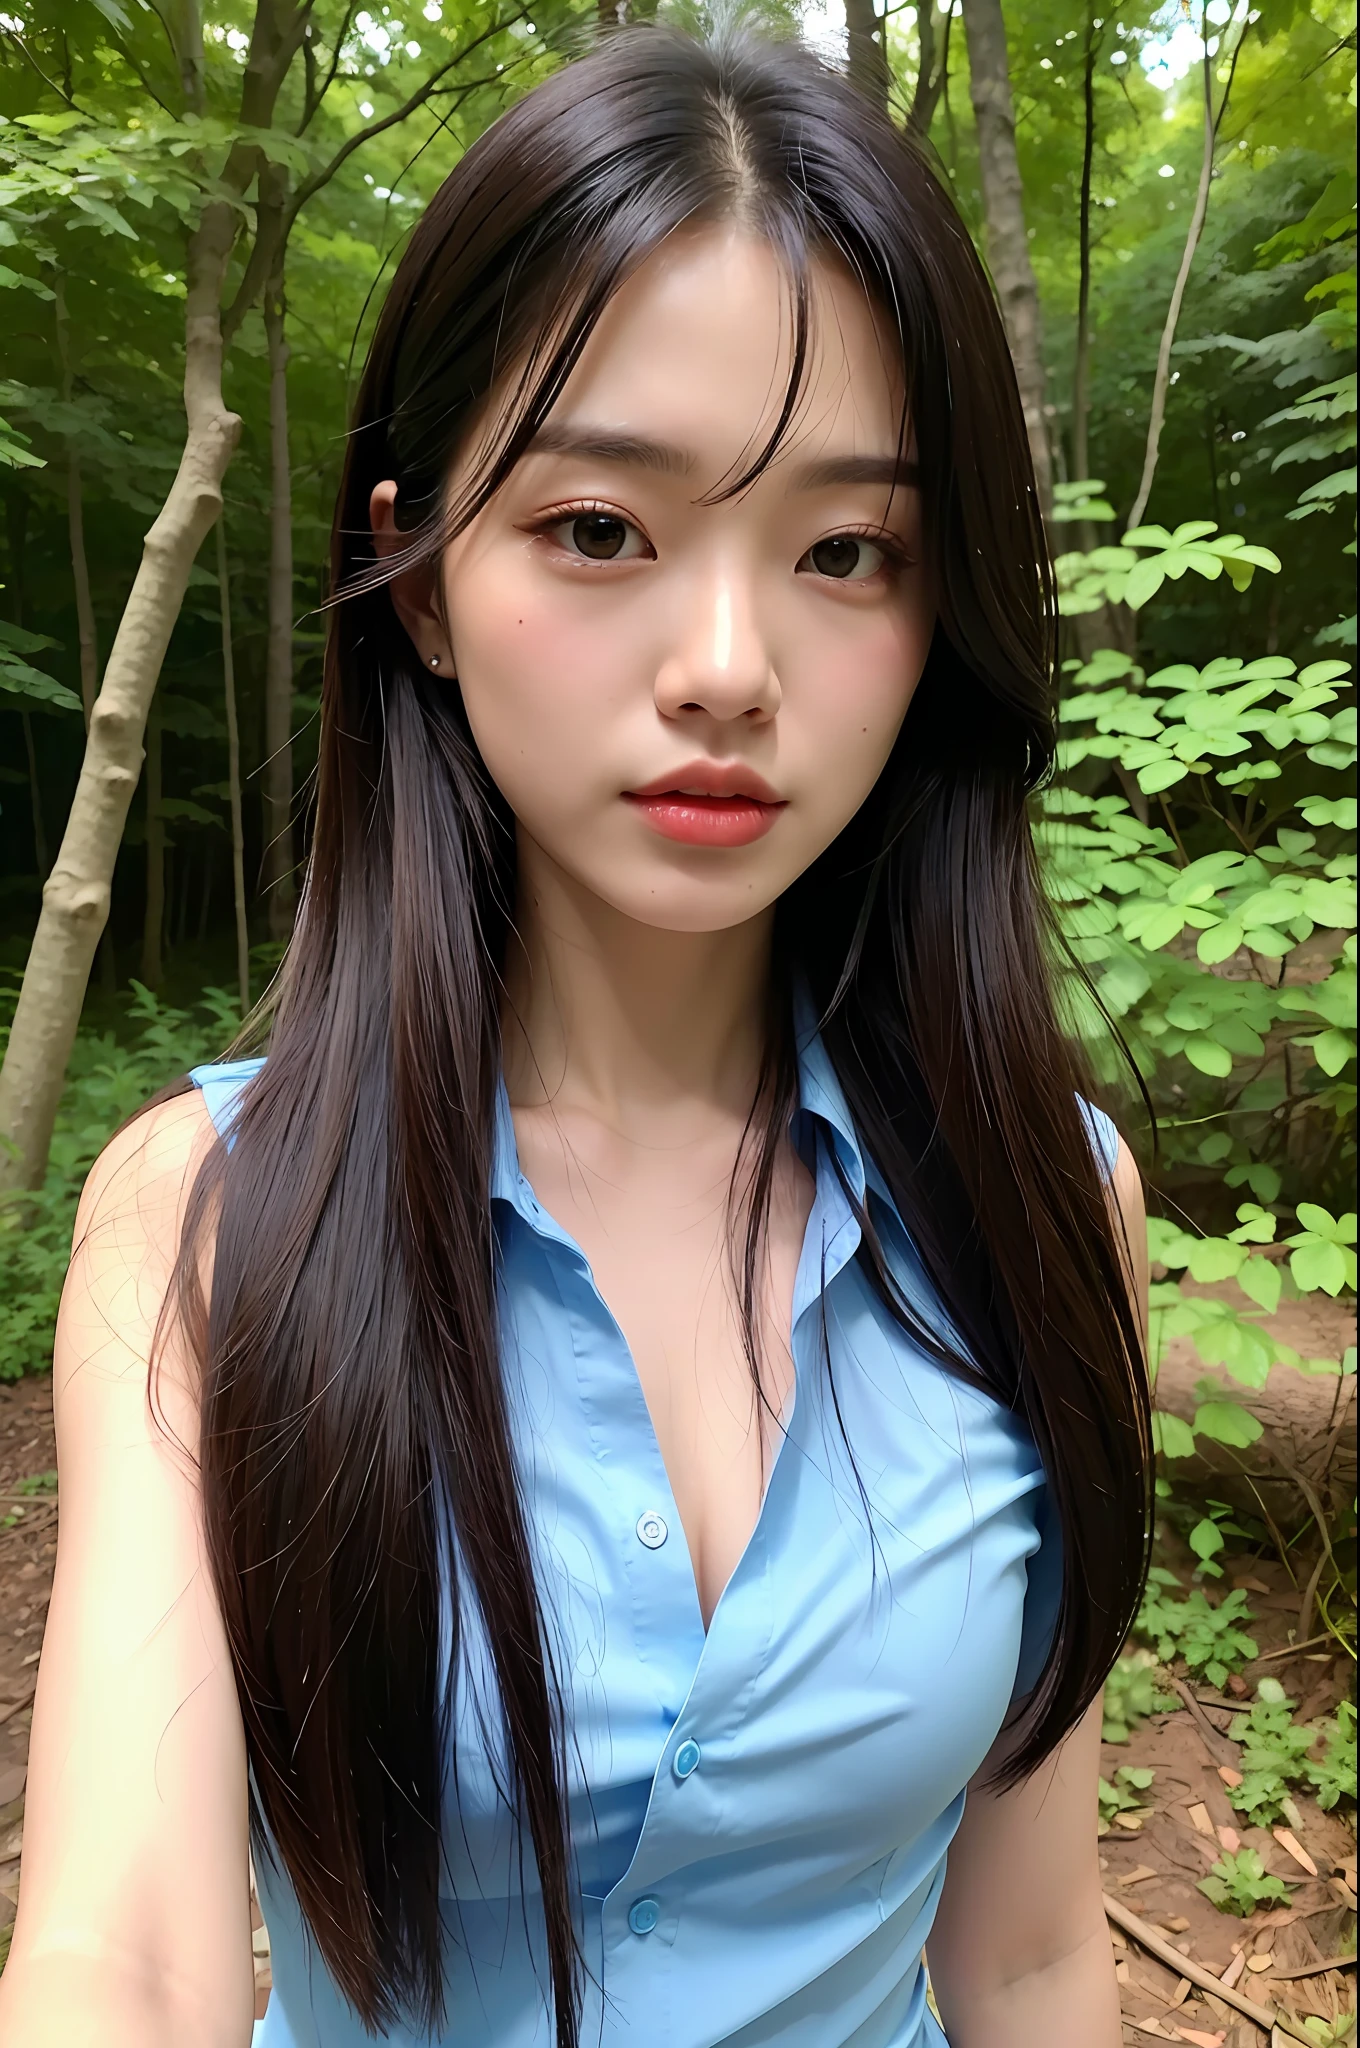 (Best Quality, Masterpiece: 1.2), Woman, Portrait, Translucent Open Collar Blue Shirt (Chestless), Translucent Black Tong, Mullet Head, Long Black Hair, Brown Eyes, Full Body, Outdoor, In the Woods